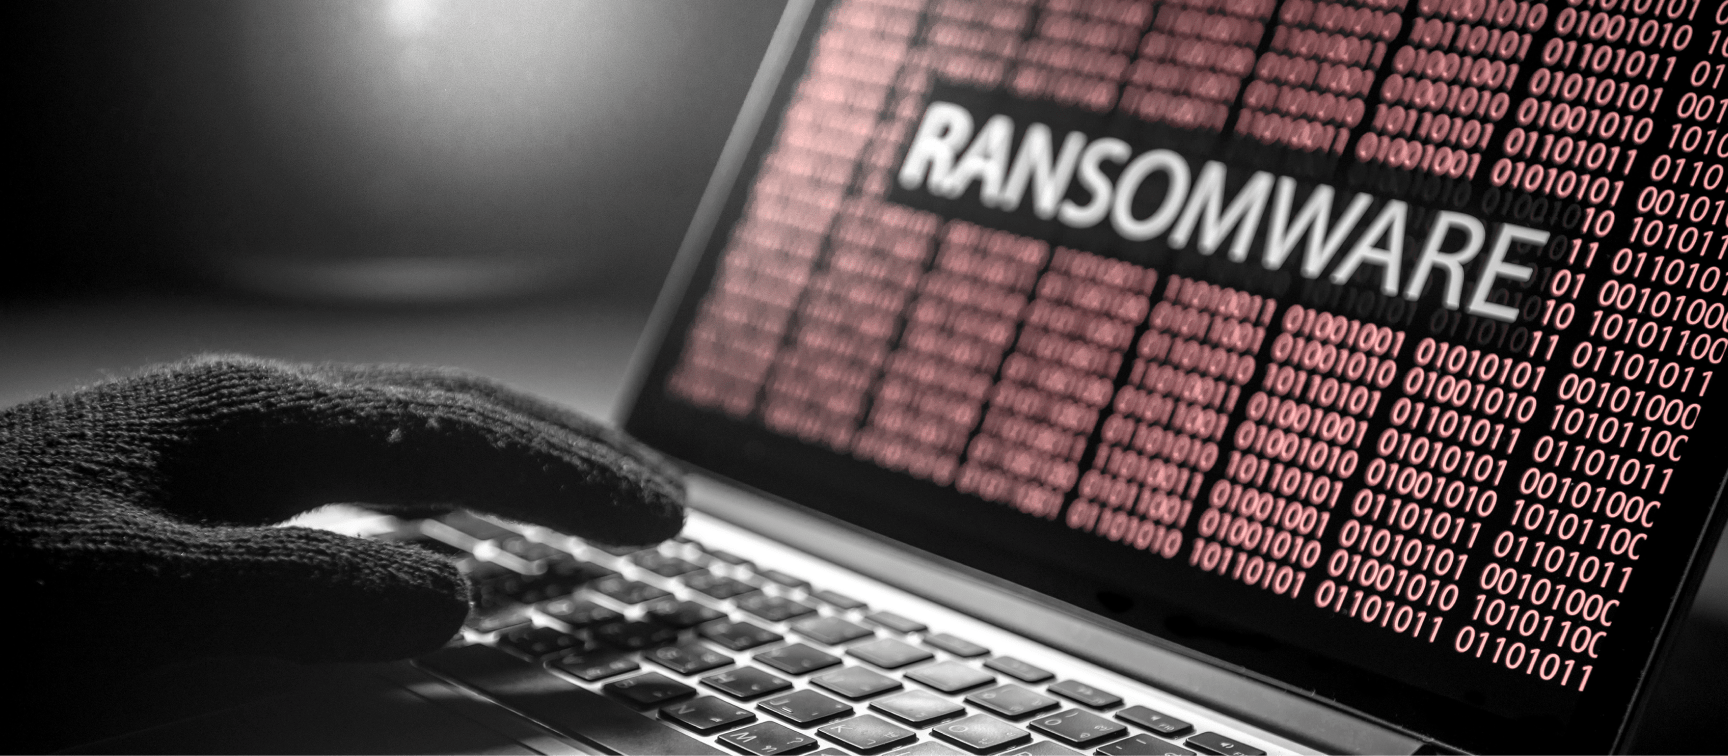 Rising Trends in Ransomware and Data in the Dark Web | Webz.io